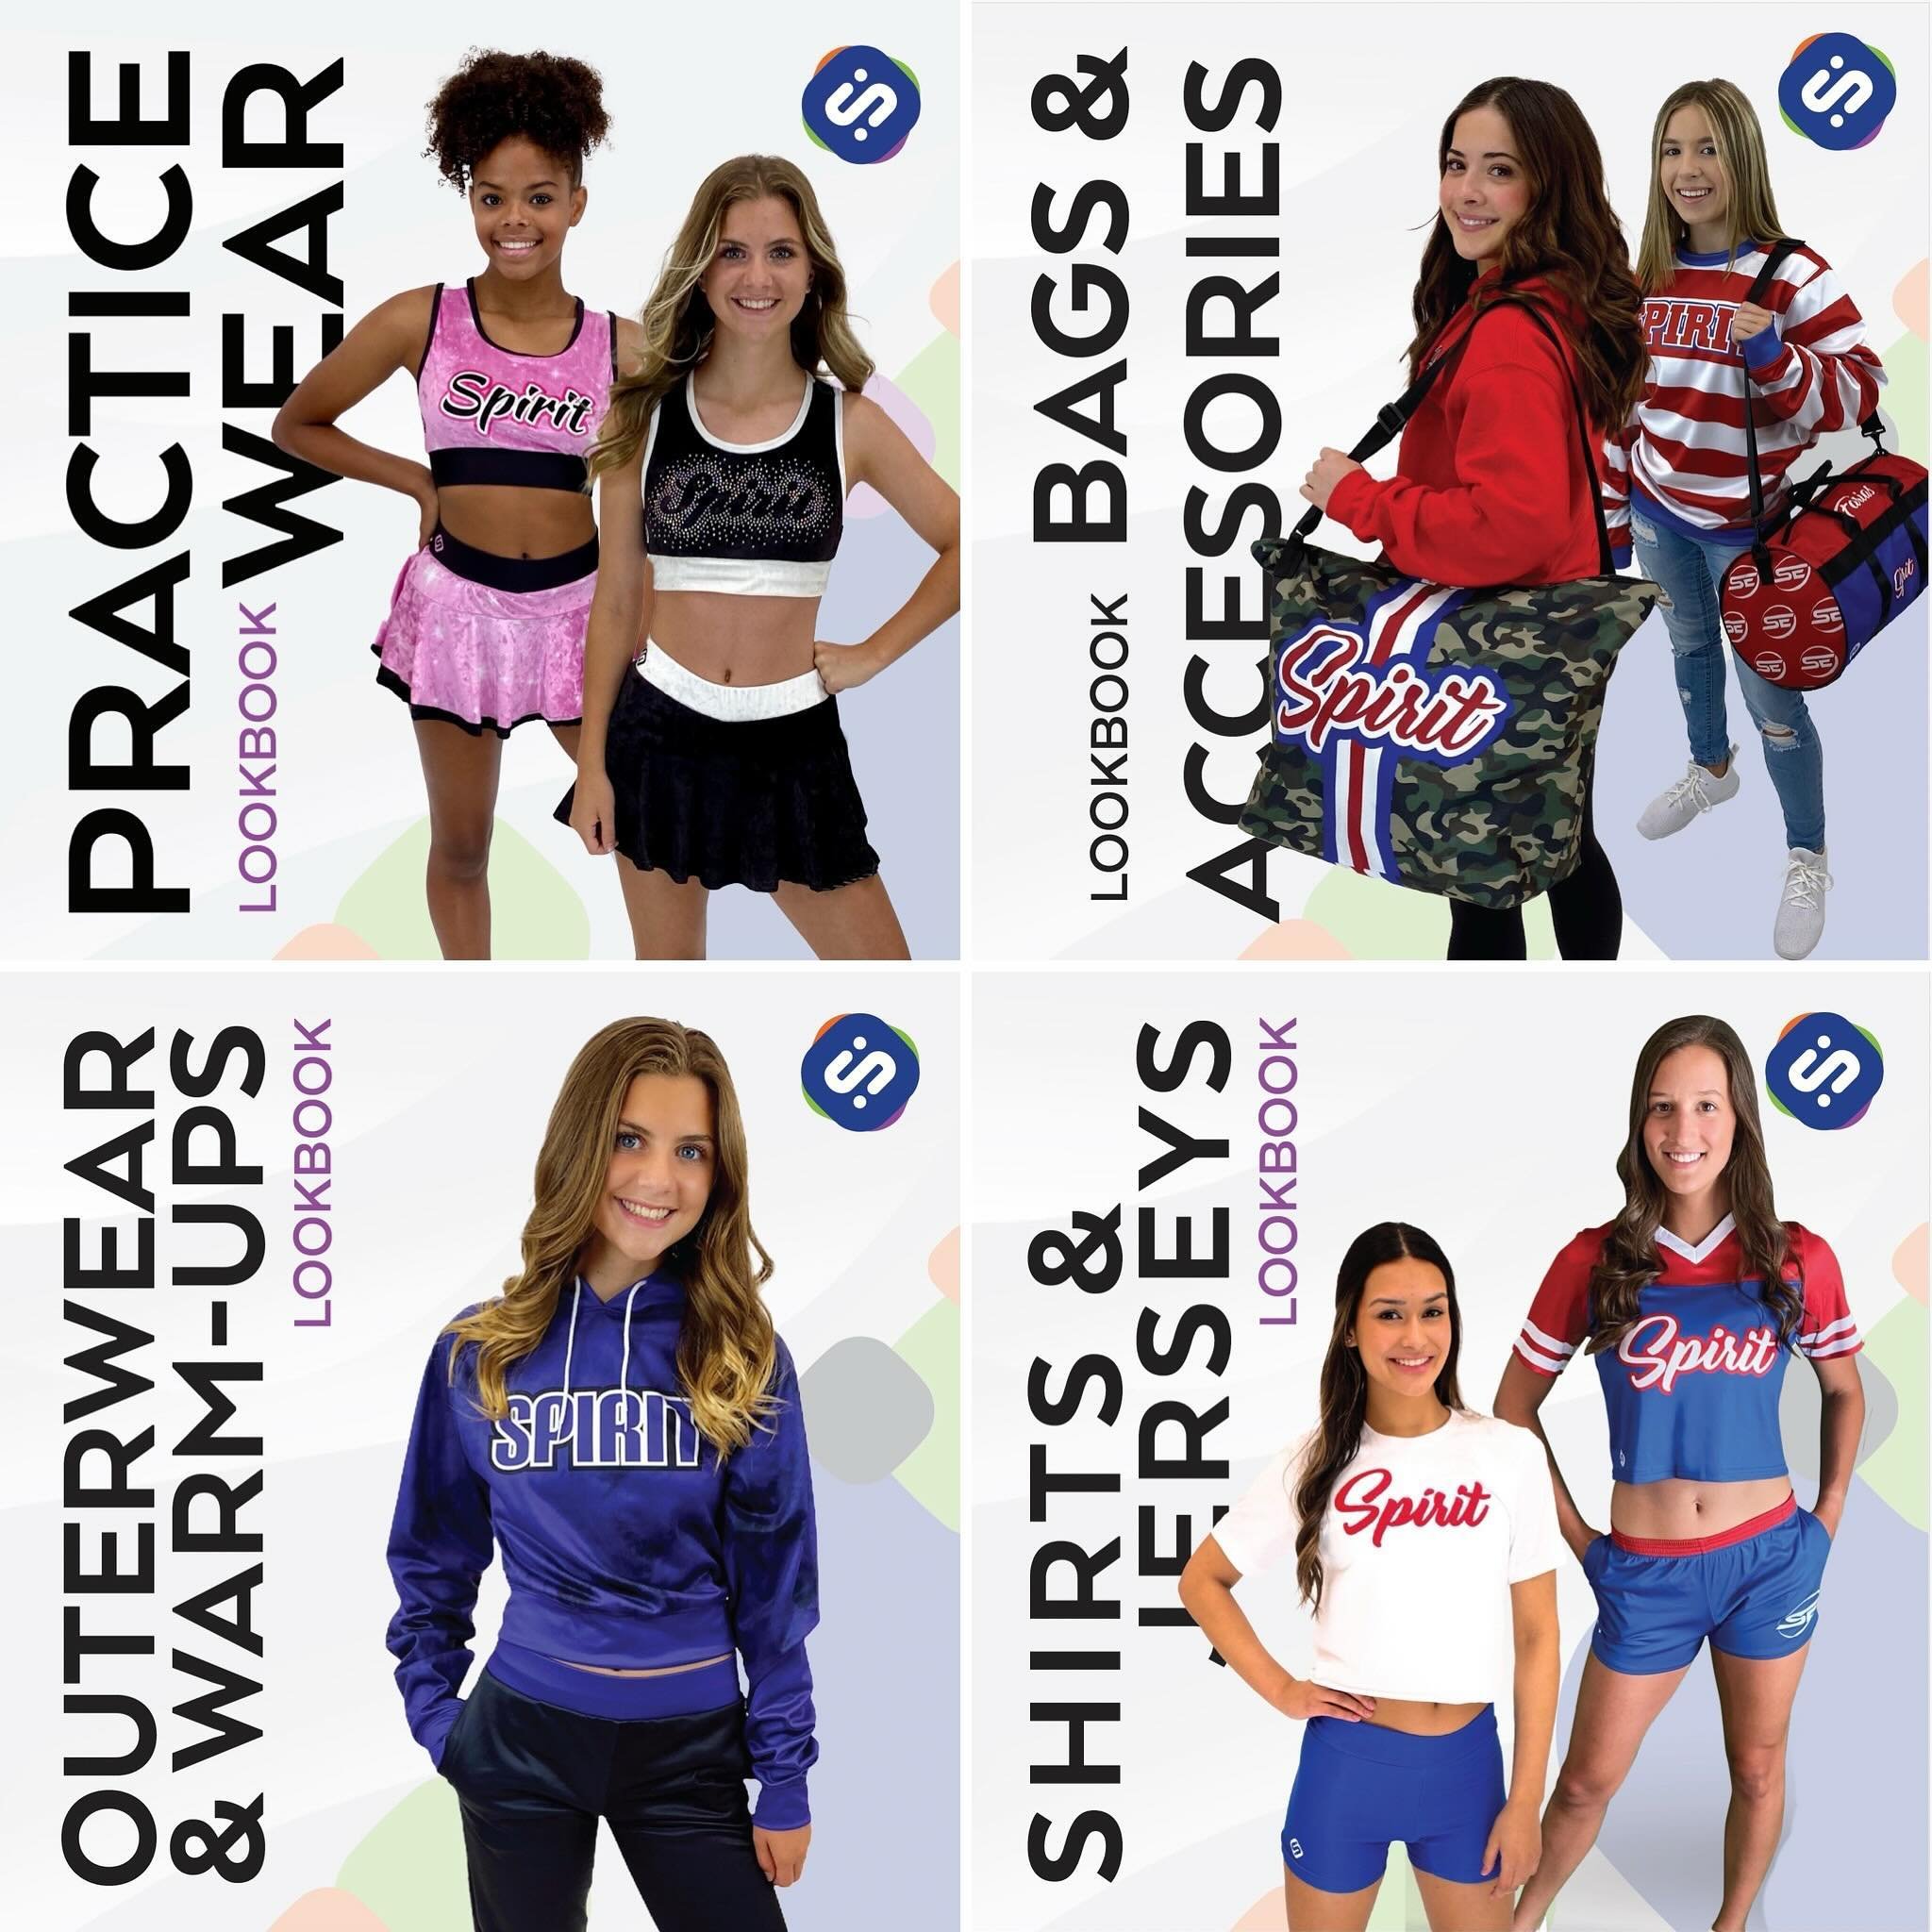 Take A Look&hellip;We&rsquo;ve Got What You Need!

Check Out All Of Our Lookbooks! 
https://www.innovativespiritwear.com

Choose to be INNOVATIVE this season. Send us a message at http://innovativespiritwear.com/contact for more information and to ge